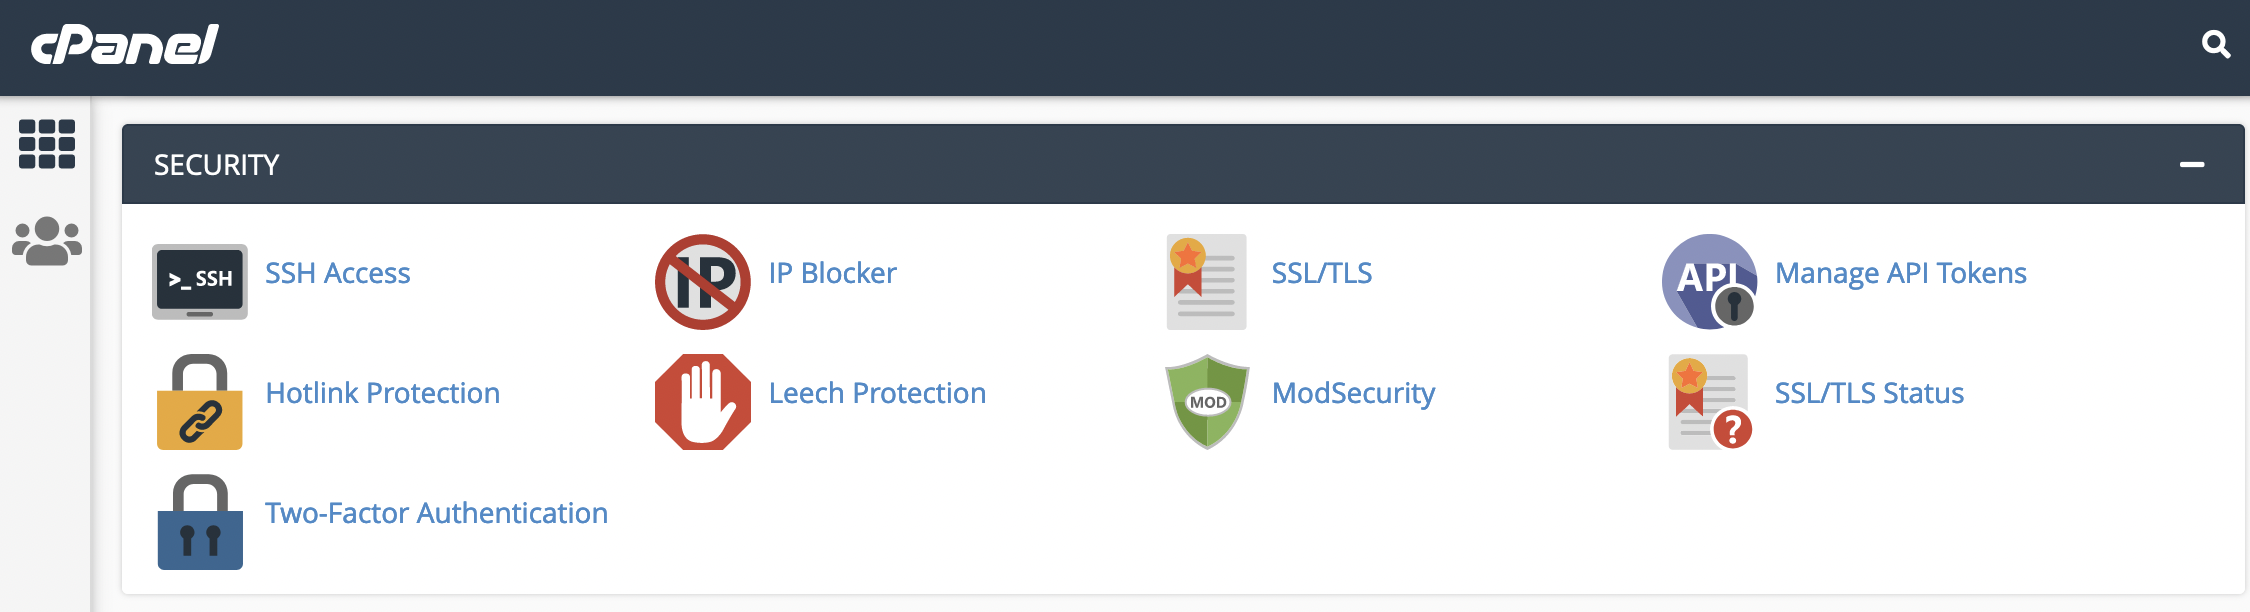 Where to find the SSL/TLS icon in cPanel